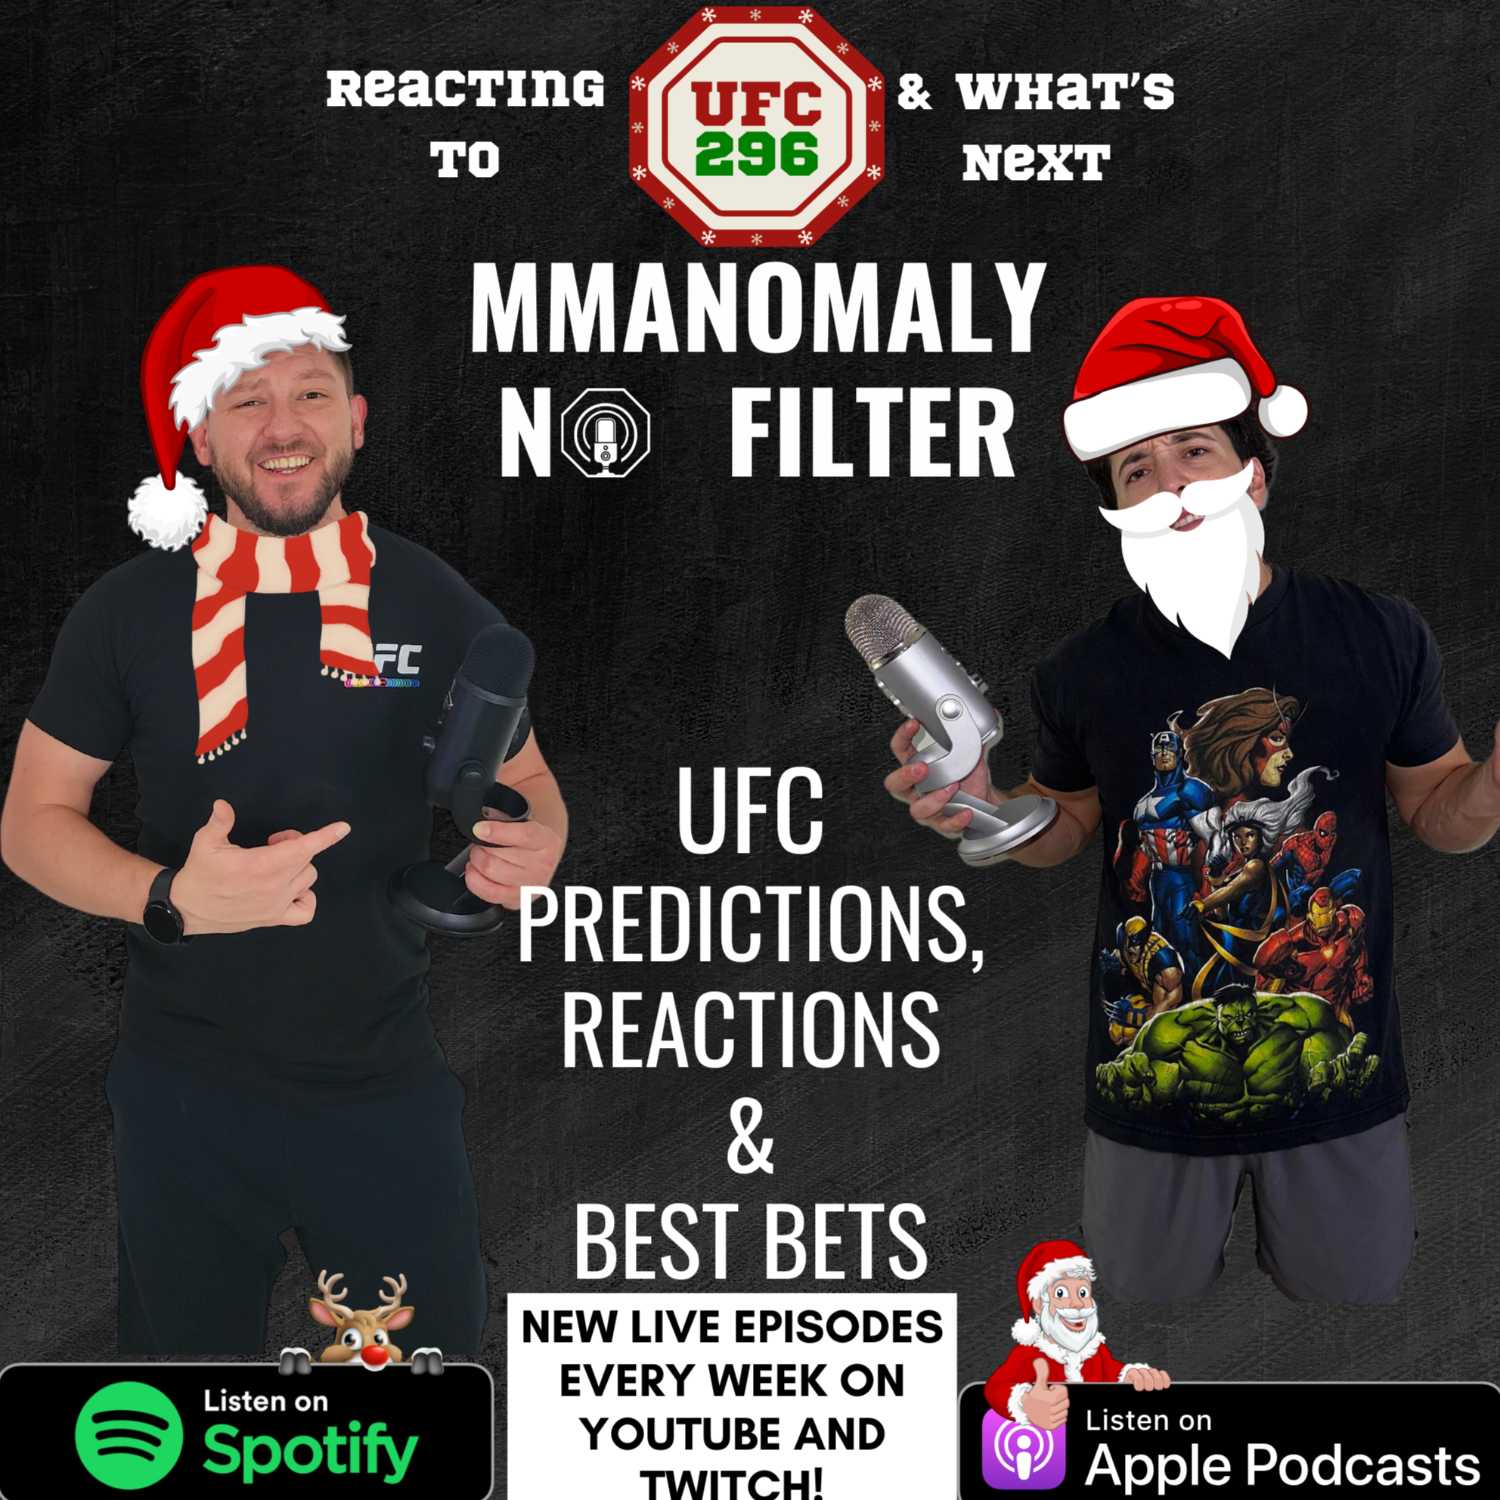 UFC 296 Reactions & What's Next?! | The MMAnomaly Show: No Filter